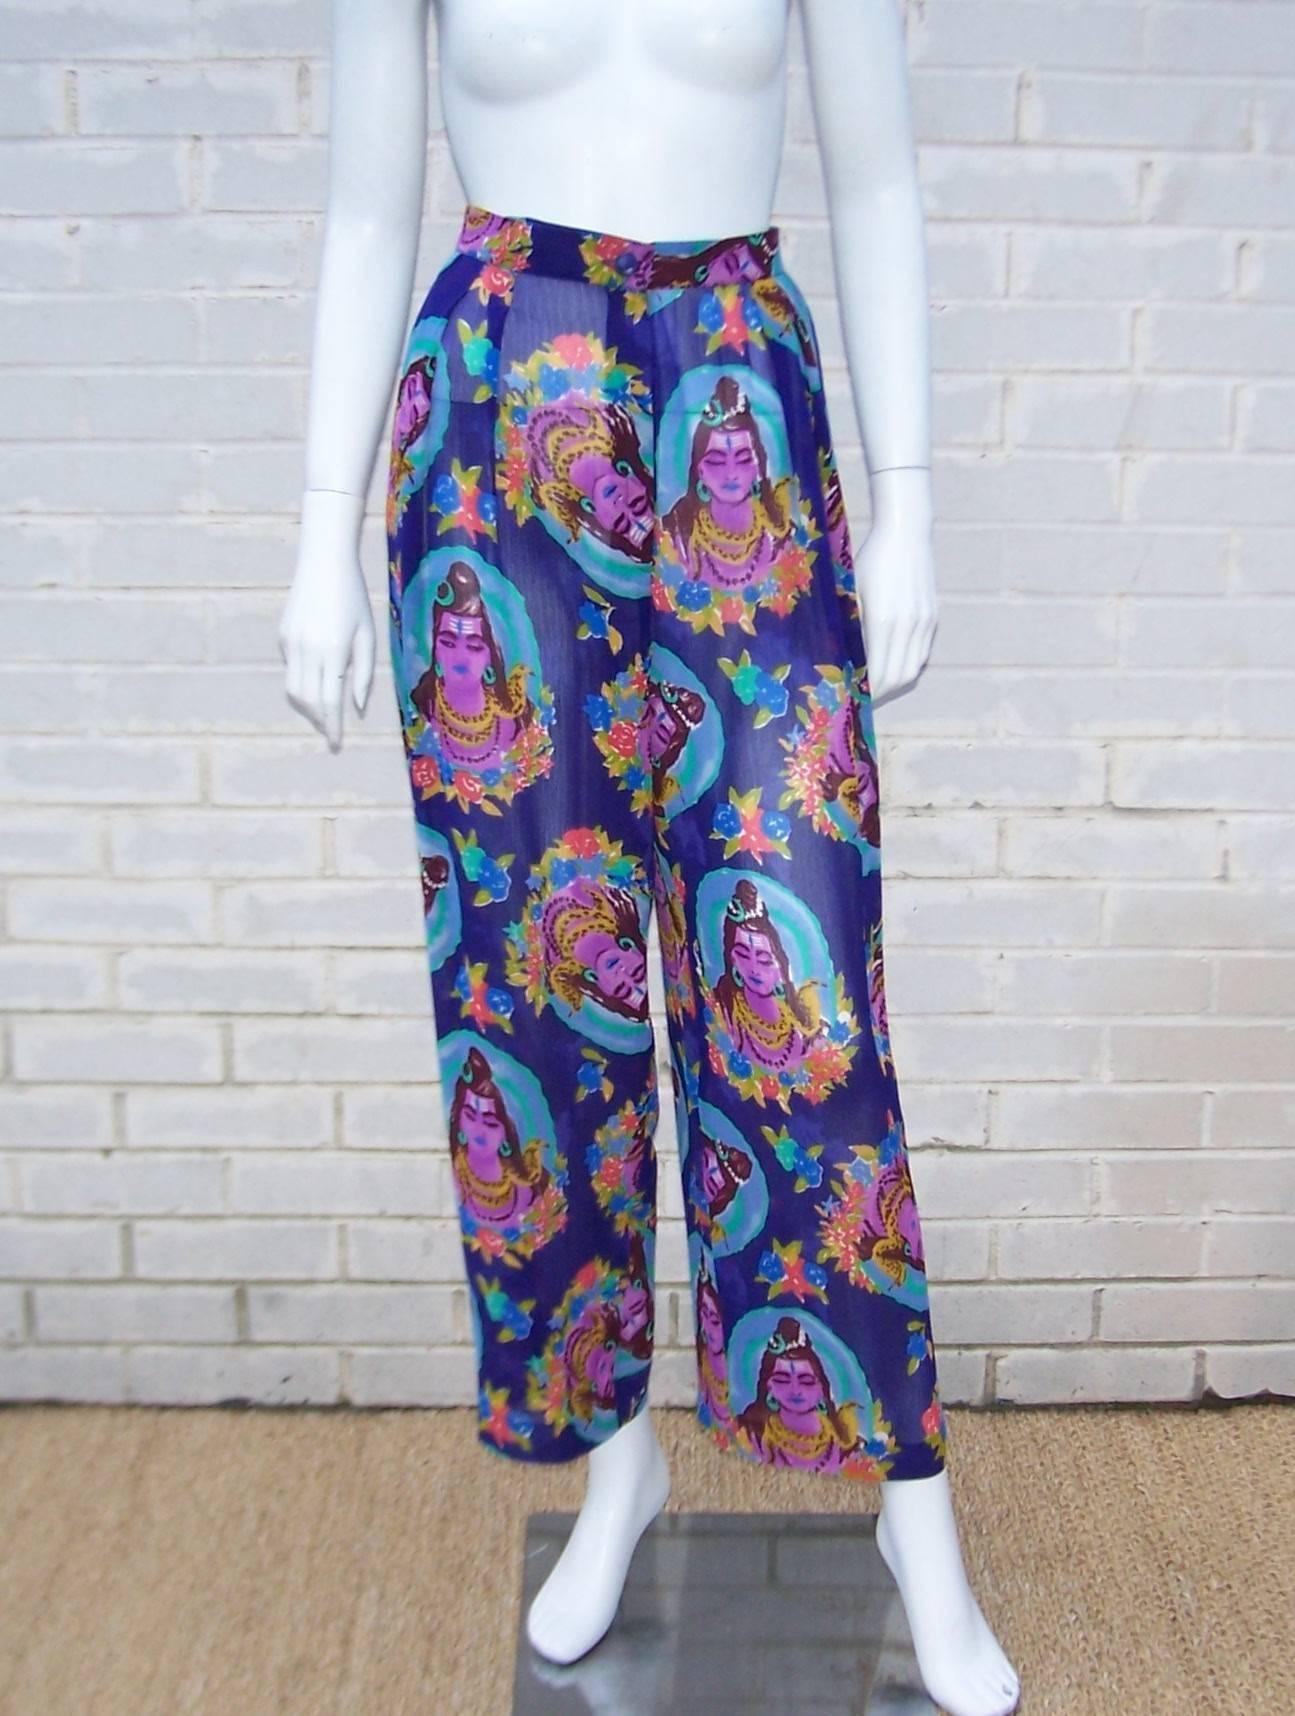 These goddess print pants by Emanuel Ungaro are the perfect foil for the warm weather season or a tropical excursion.  The lightweight gauzy fabric features a vibrant print of blues, purples, aqua, yellow, green and orangey red.  The star of the